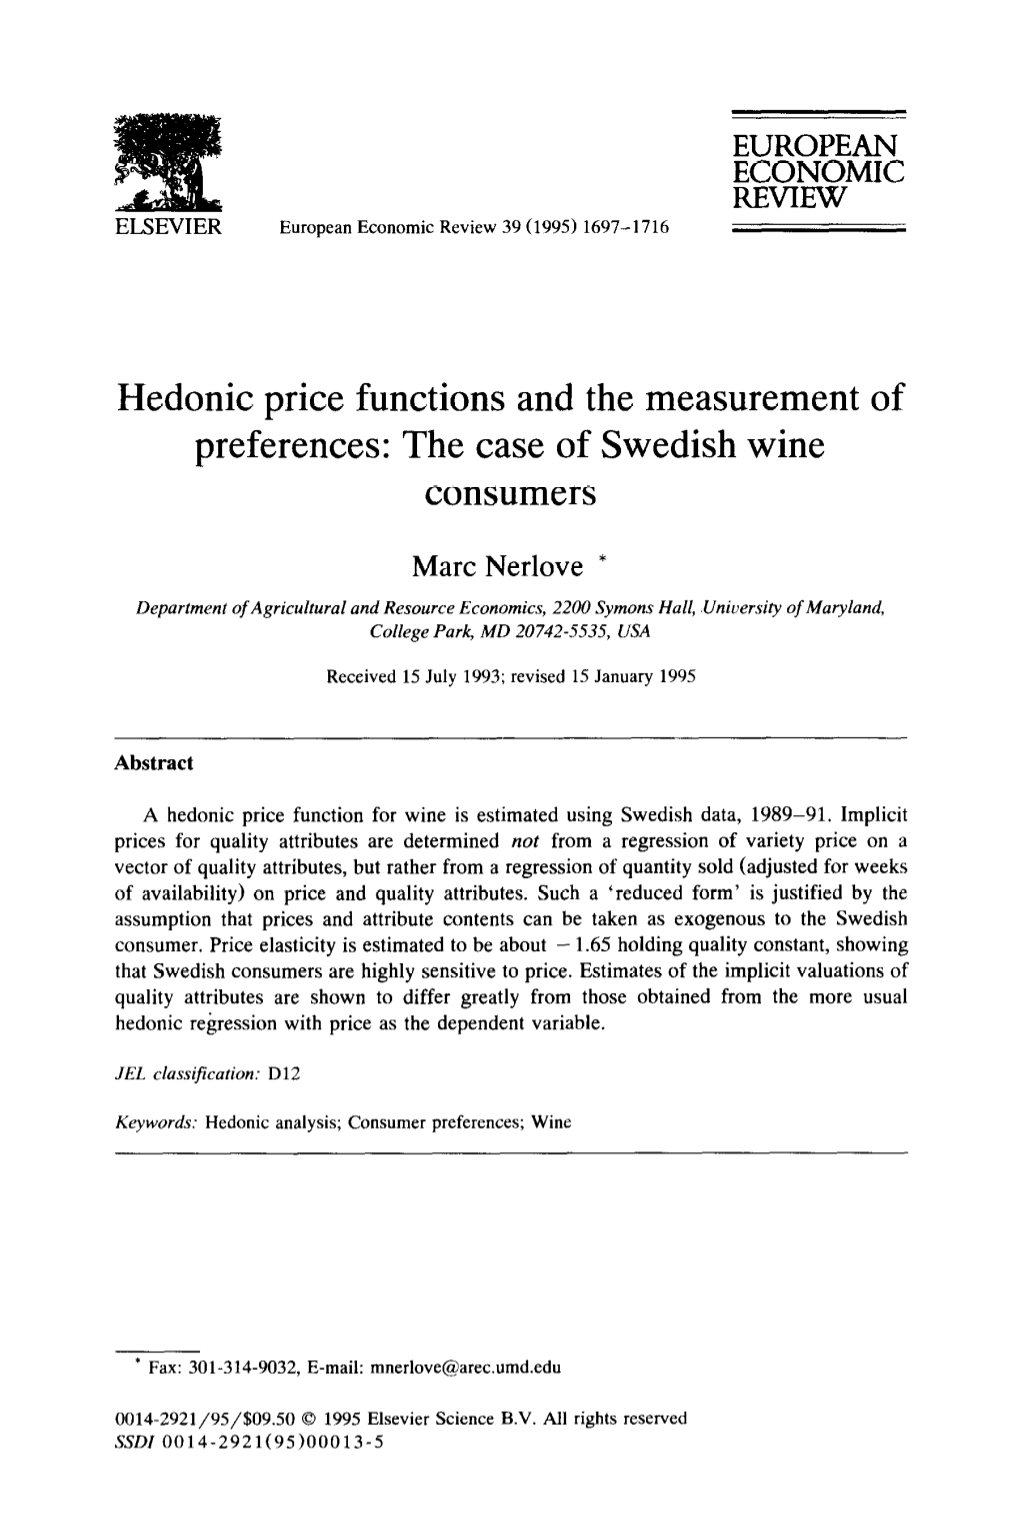 Hedonic Price Functions and the Measurement of Preferences: the Case of Swedish Wine Consumers